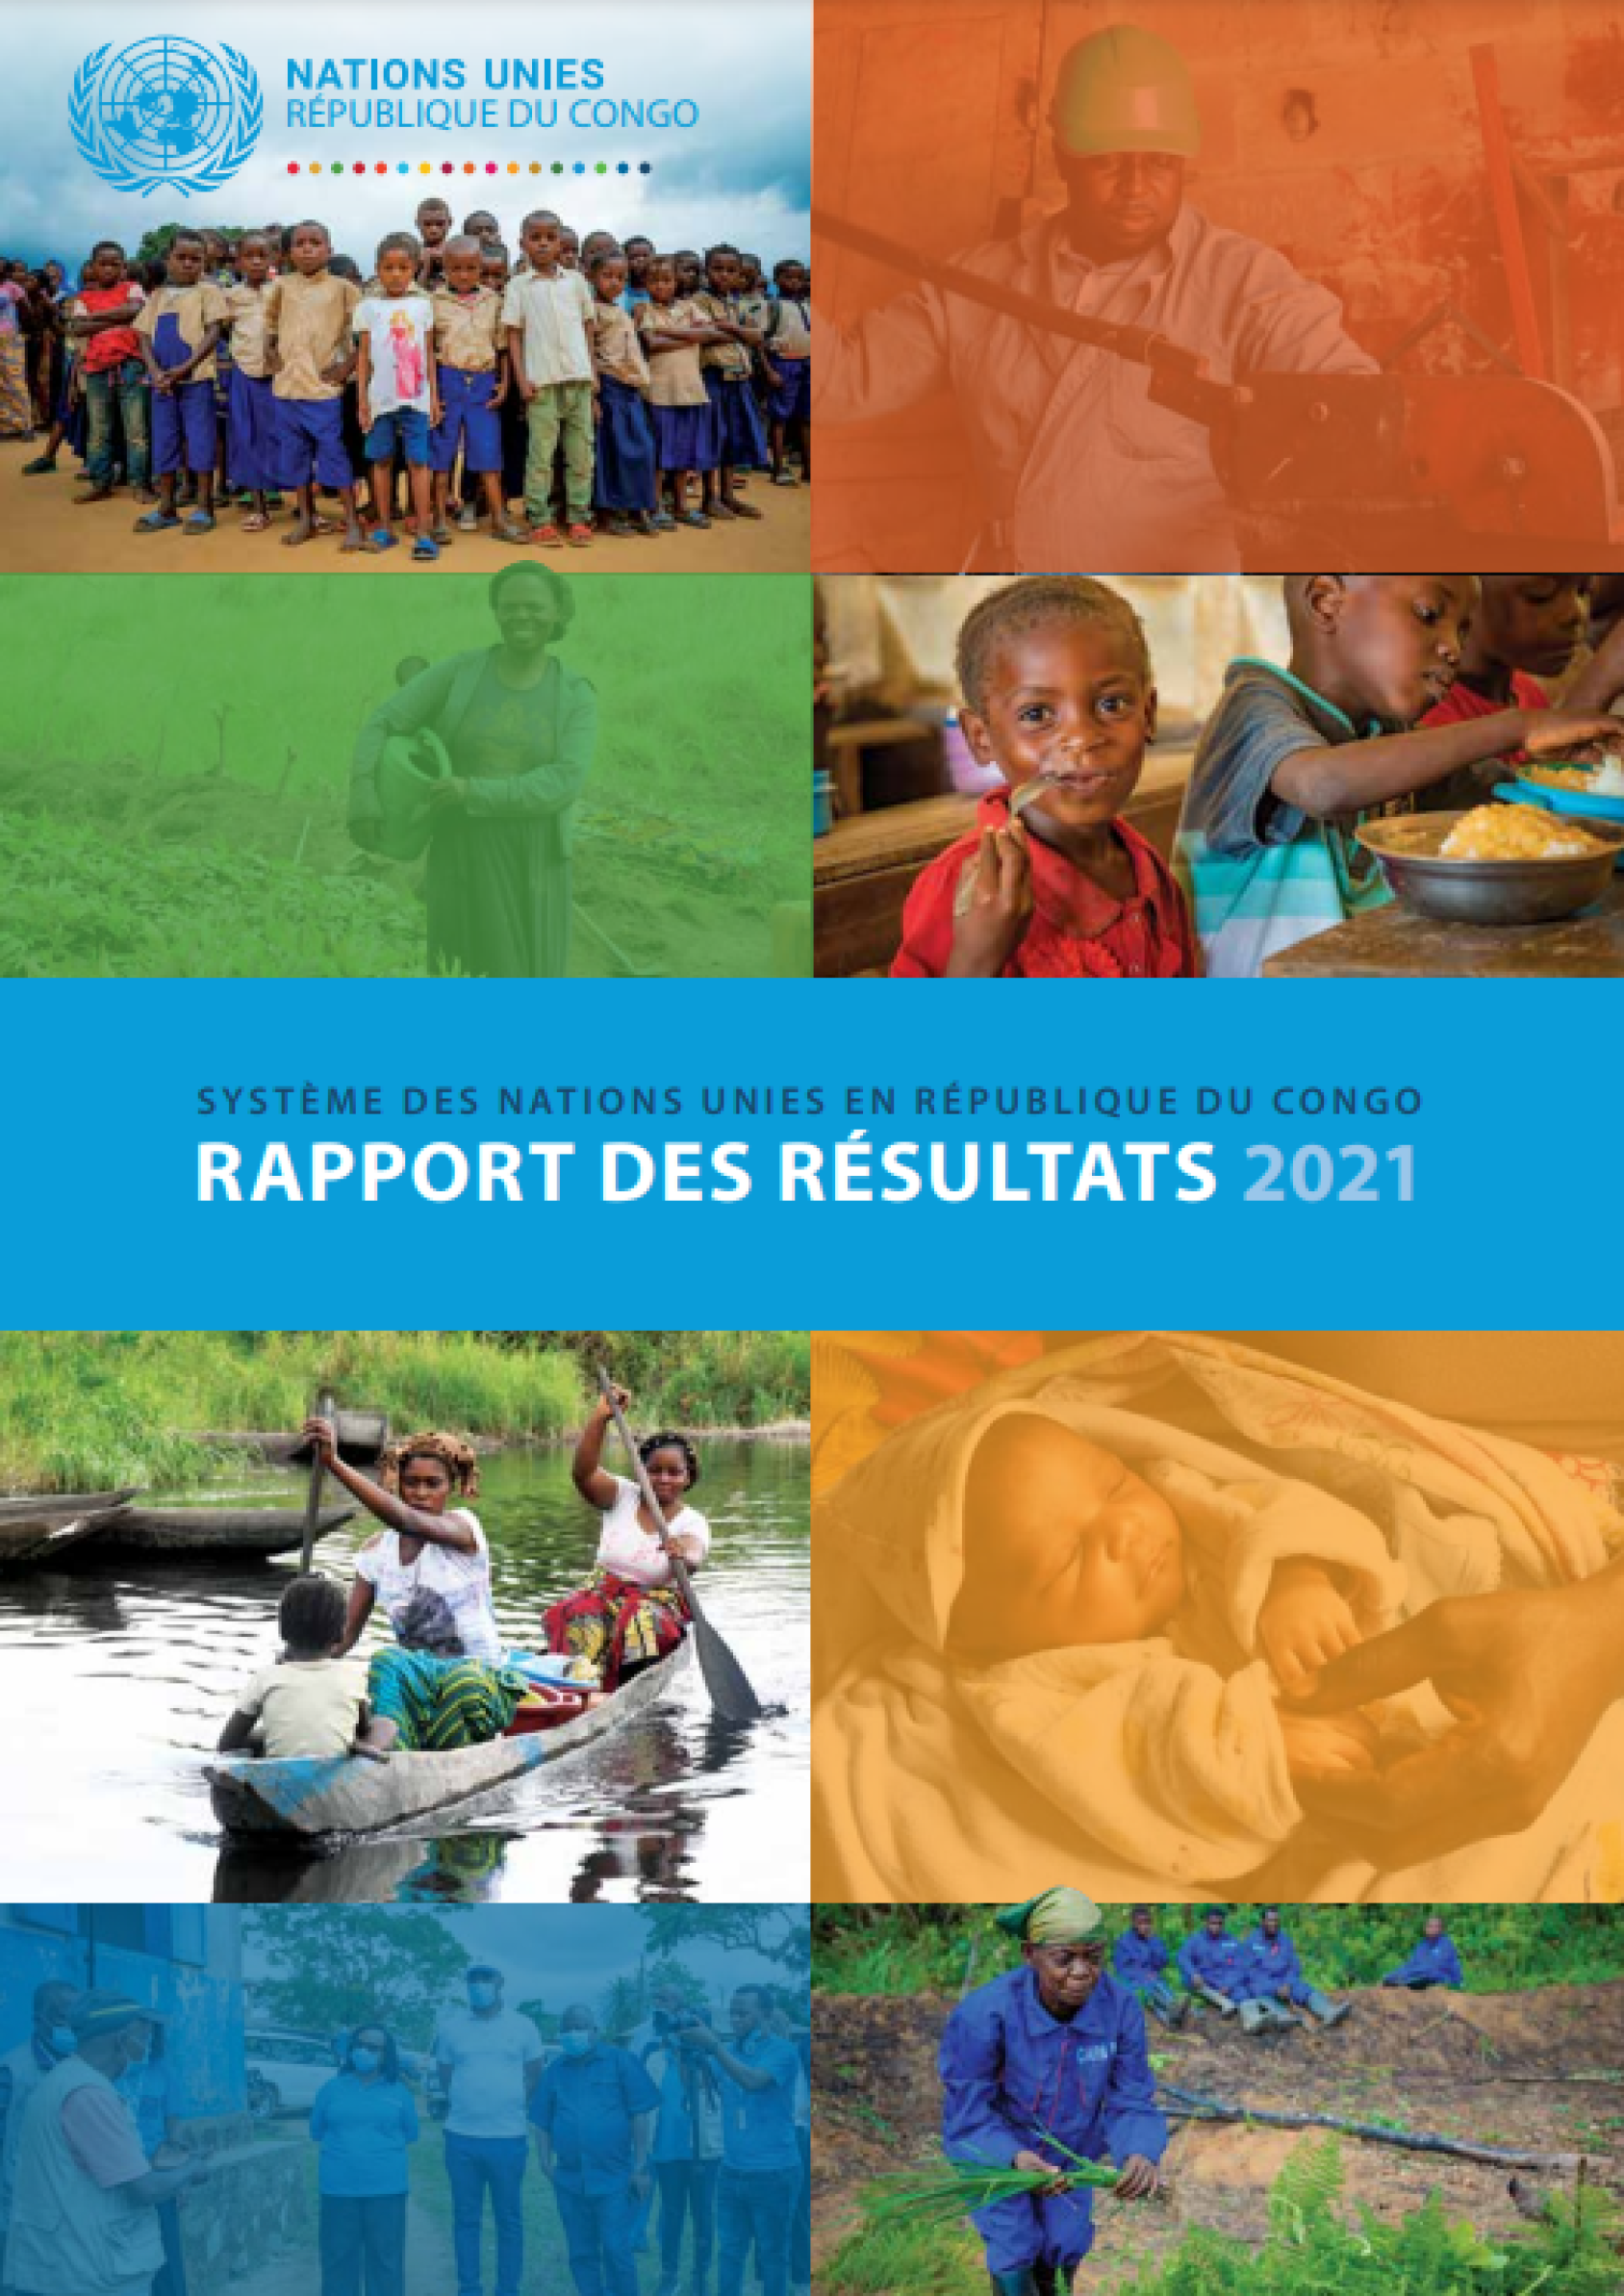 Colorful quadrants on a report cover (orange, yellow green) featuring people in different settings.